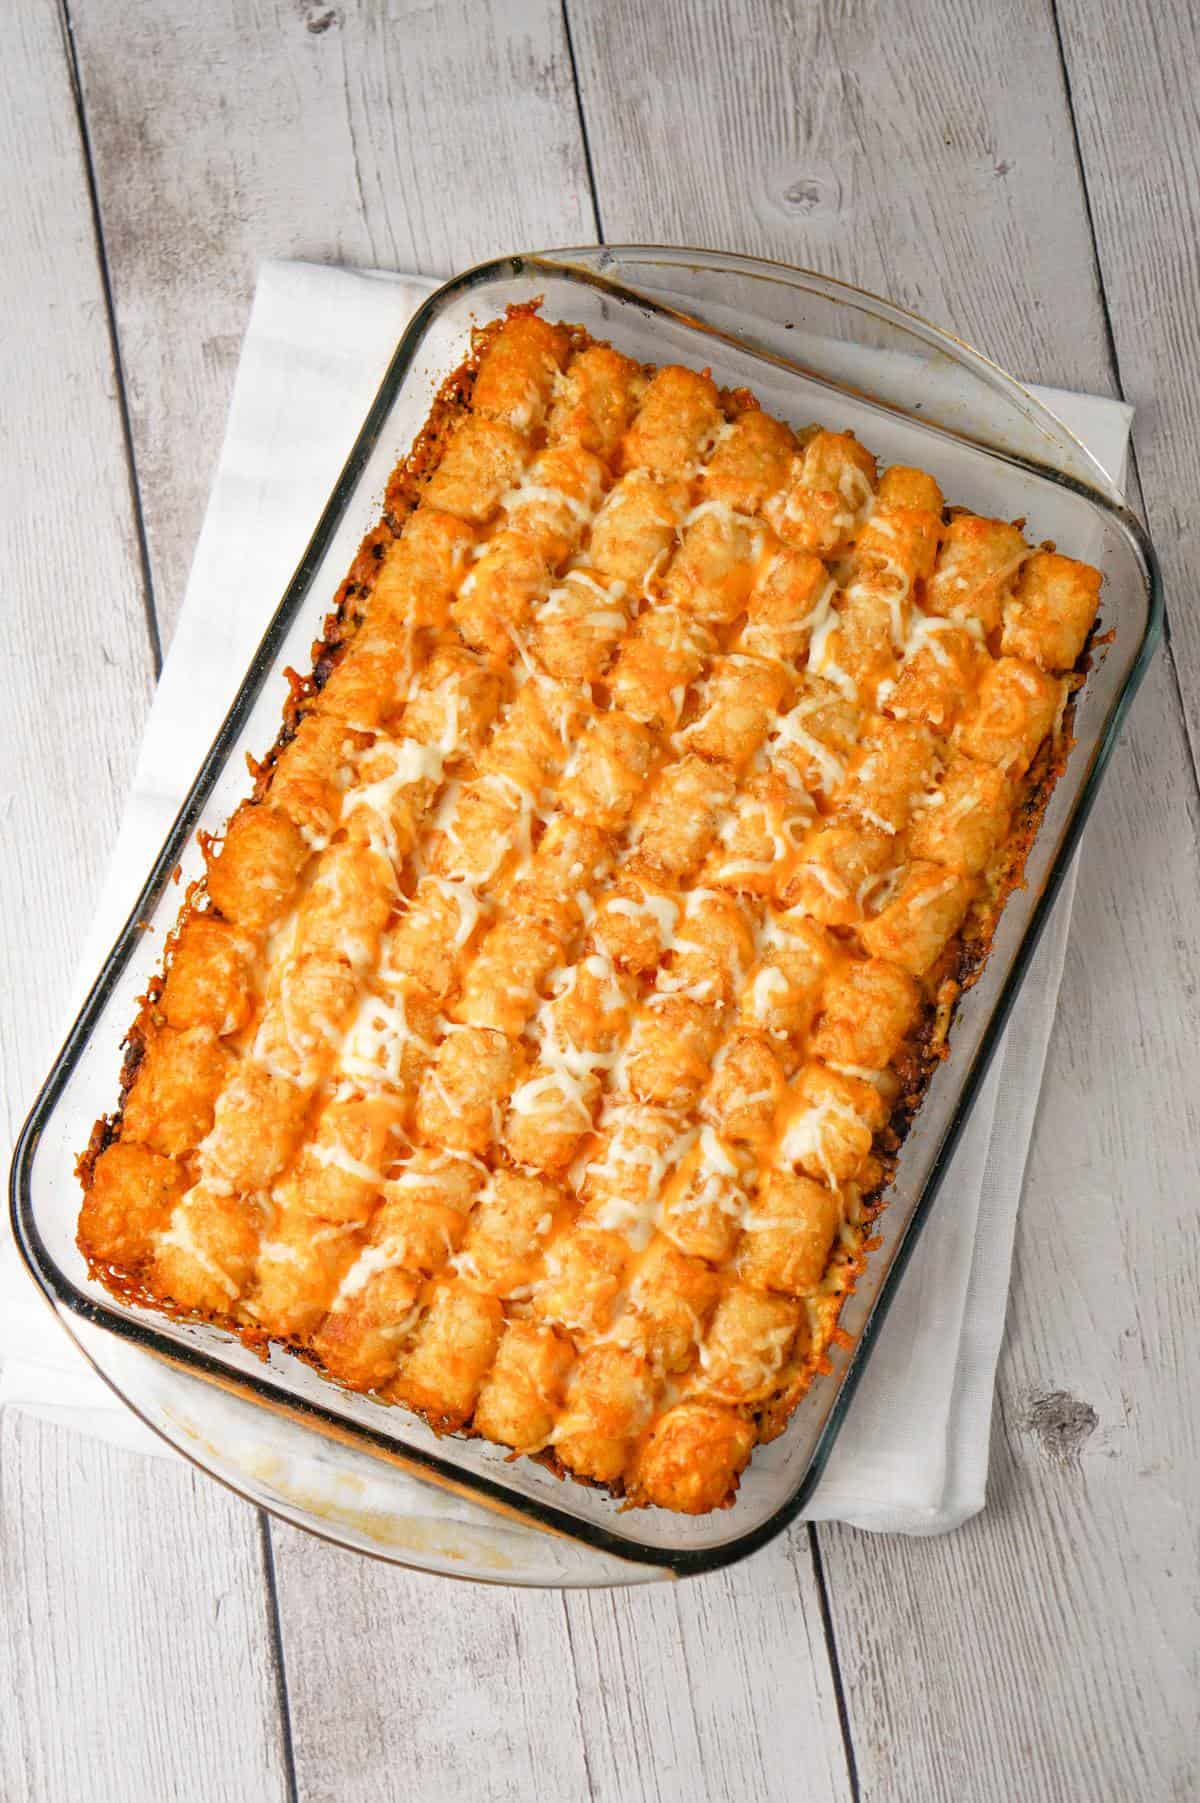 Dr Pepper Pork Tater Tot Casserole is a hearty dish with a base of ground pork cooked in Dr Pepper and BBQ sauce and topped with tater tots and shredded cheese.